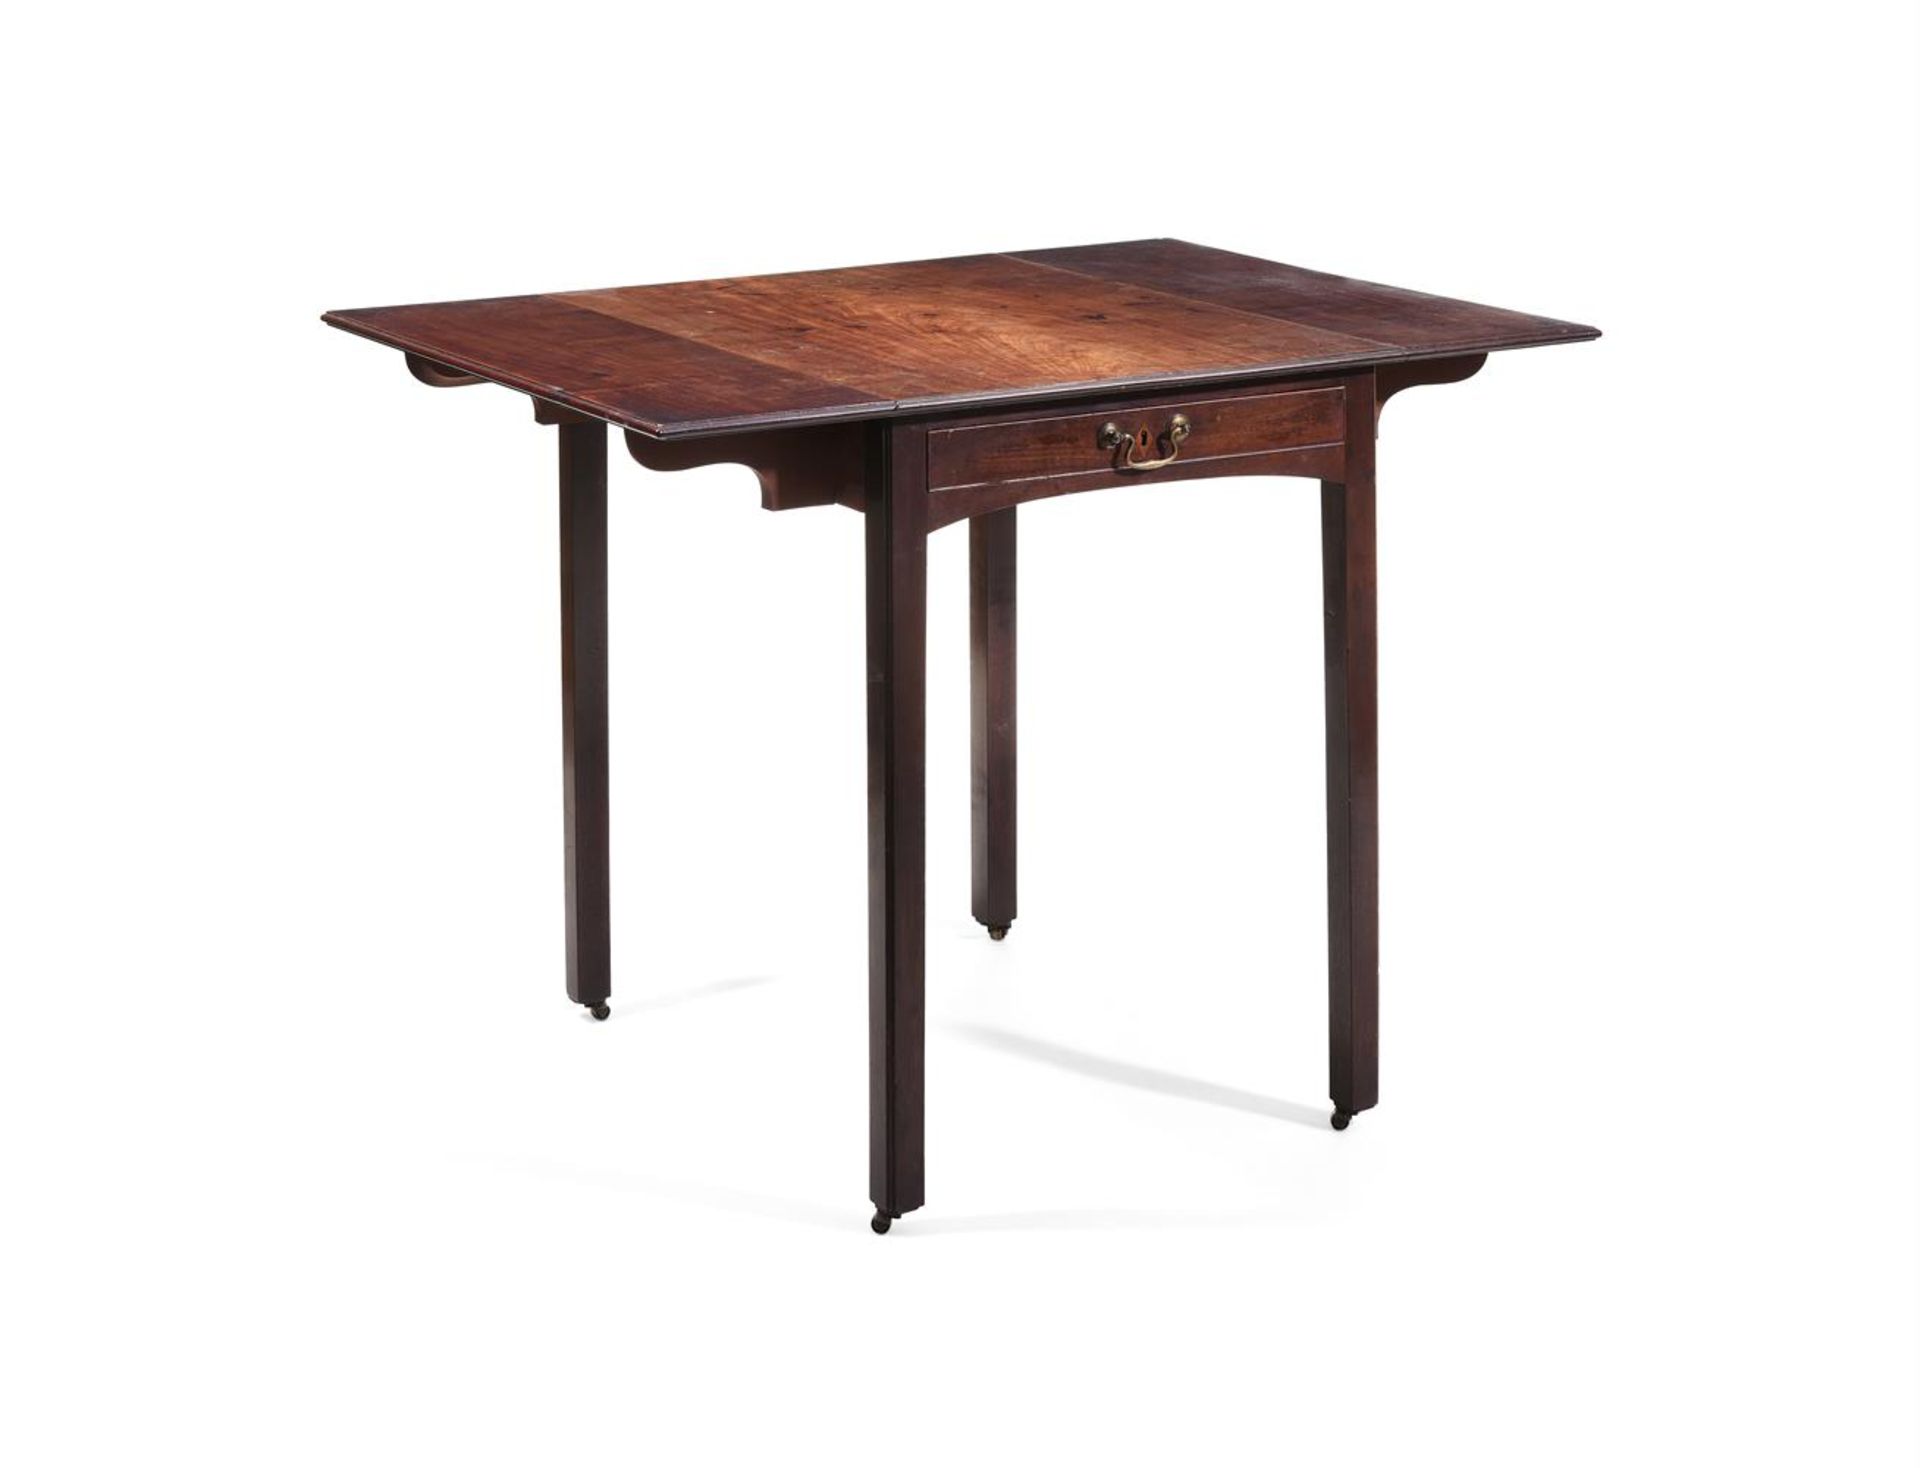 A GEORGE III MAHOGANY PEMBROKE TABLE, IN THE MANNER OF THOMAS CHIPPENDALE - Image 2 of 3